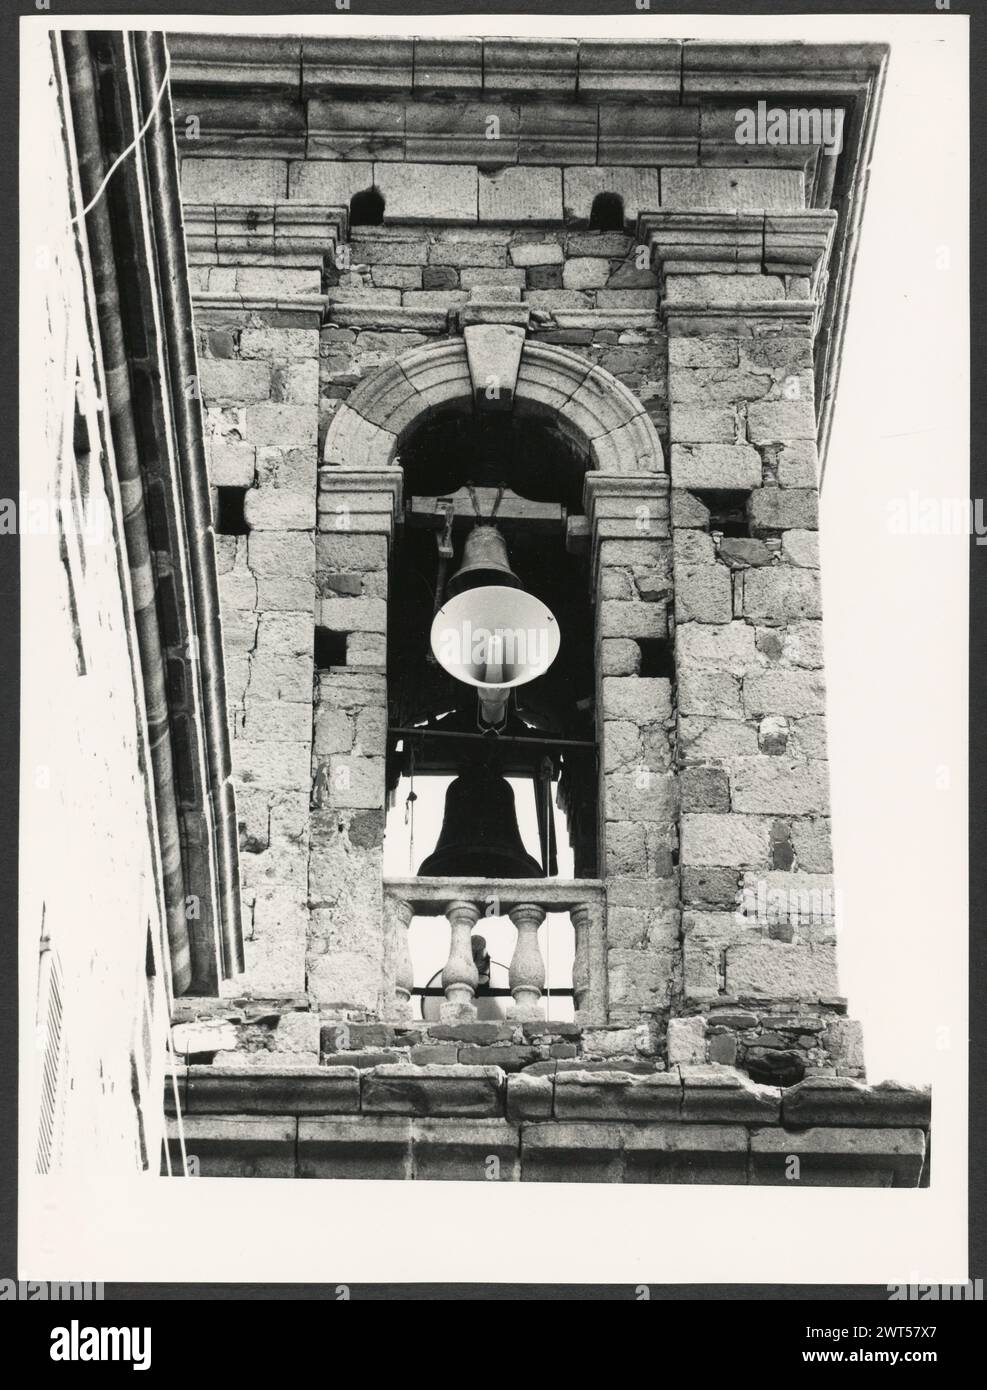 Tuscany Grosseto Seggiano Parish church. Hutzel, Max 1960-1990 German-born photographer and scholar Max Hutzel (1911-1988) photographed in Italy from the early 1960s until his death. The result of this project, referred to by Hutzel as Foto Arte Minore, is thorough documentation of art historical development in Italy up to the 18th century, including objects of the Etruscans and the Romans, as well as early Medieval, Romanesque, Gothic, Renaissance and Baroque monuments. Images are organized by geographic region in Italy, then by province, city, site complex and monument. Stock Photo